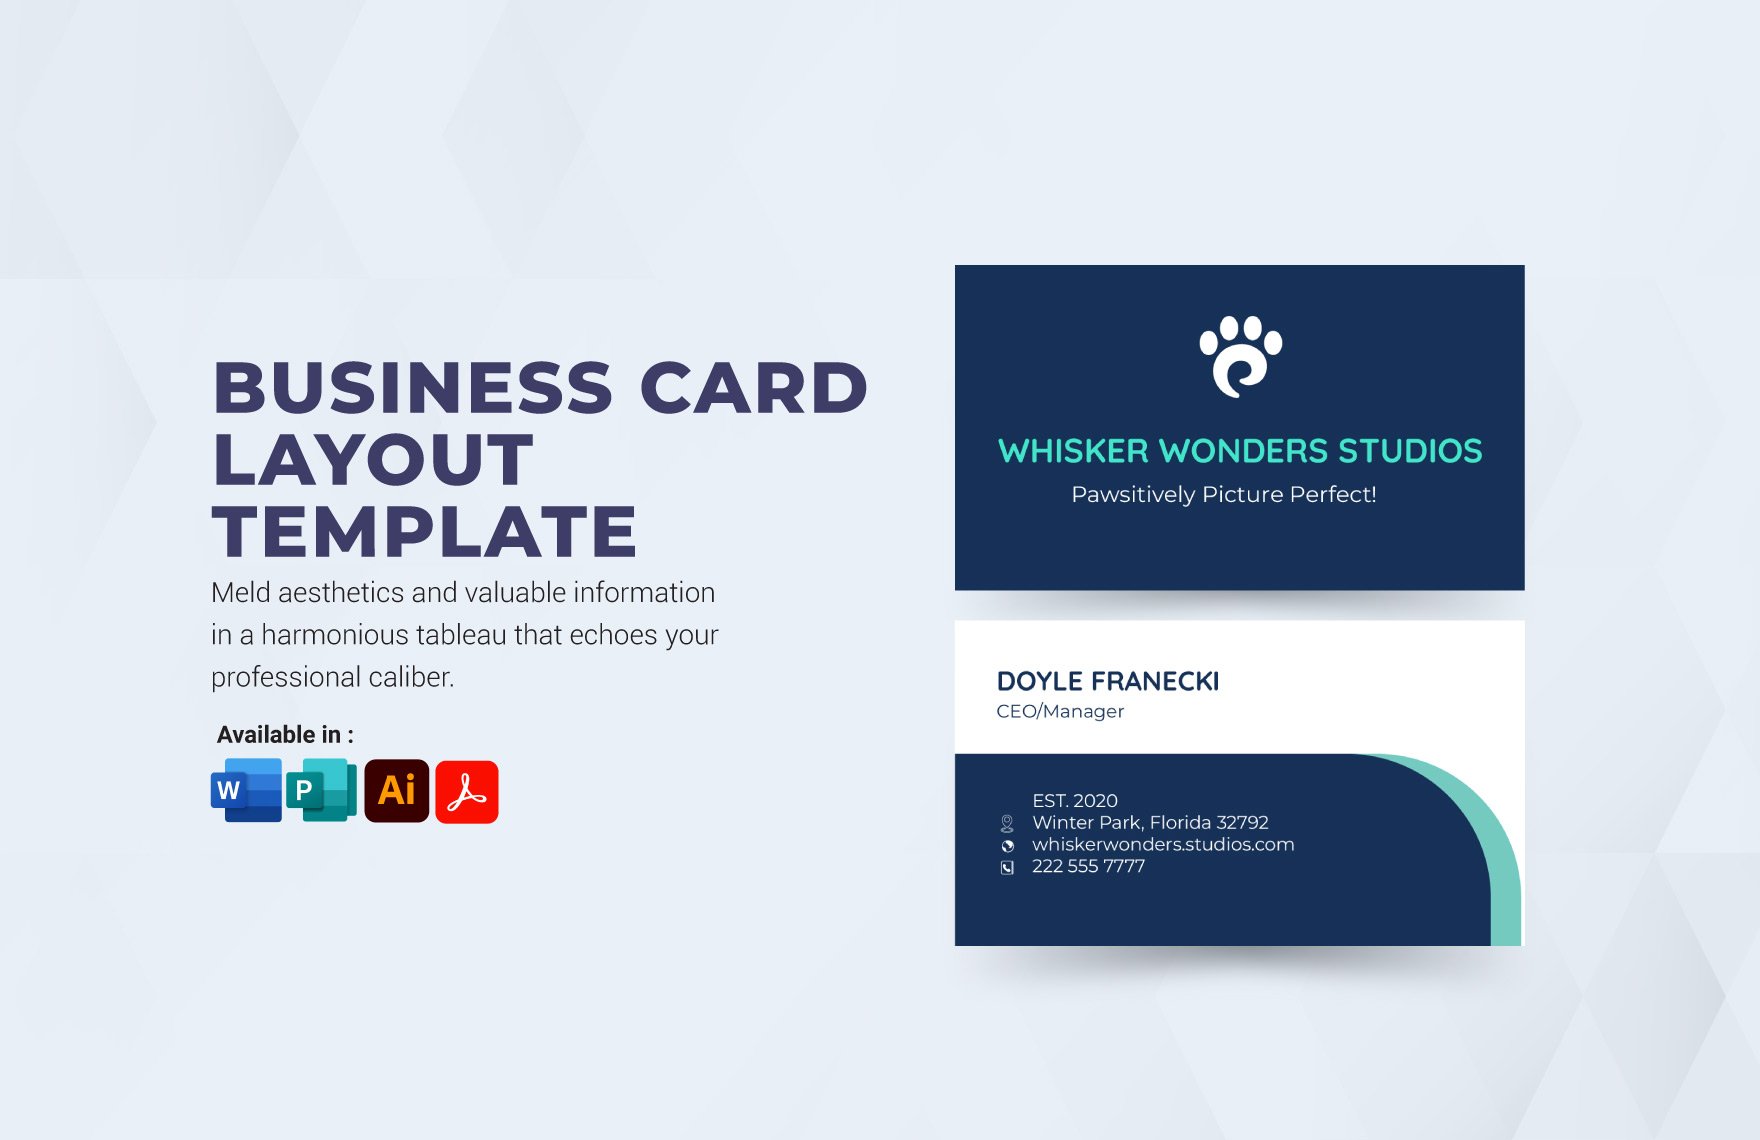 Business Card Layout Template in Word, PDF, Illustrator, Publisher, InDesign